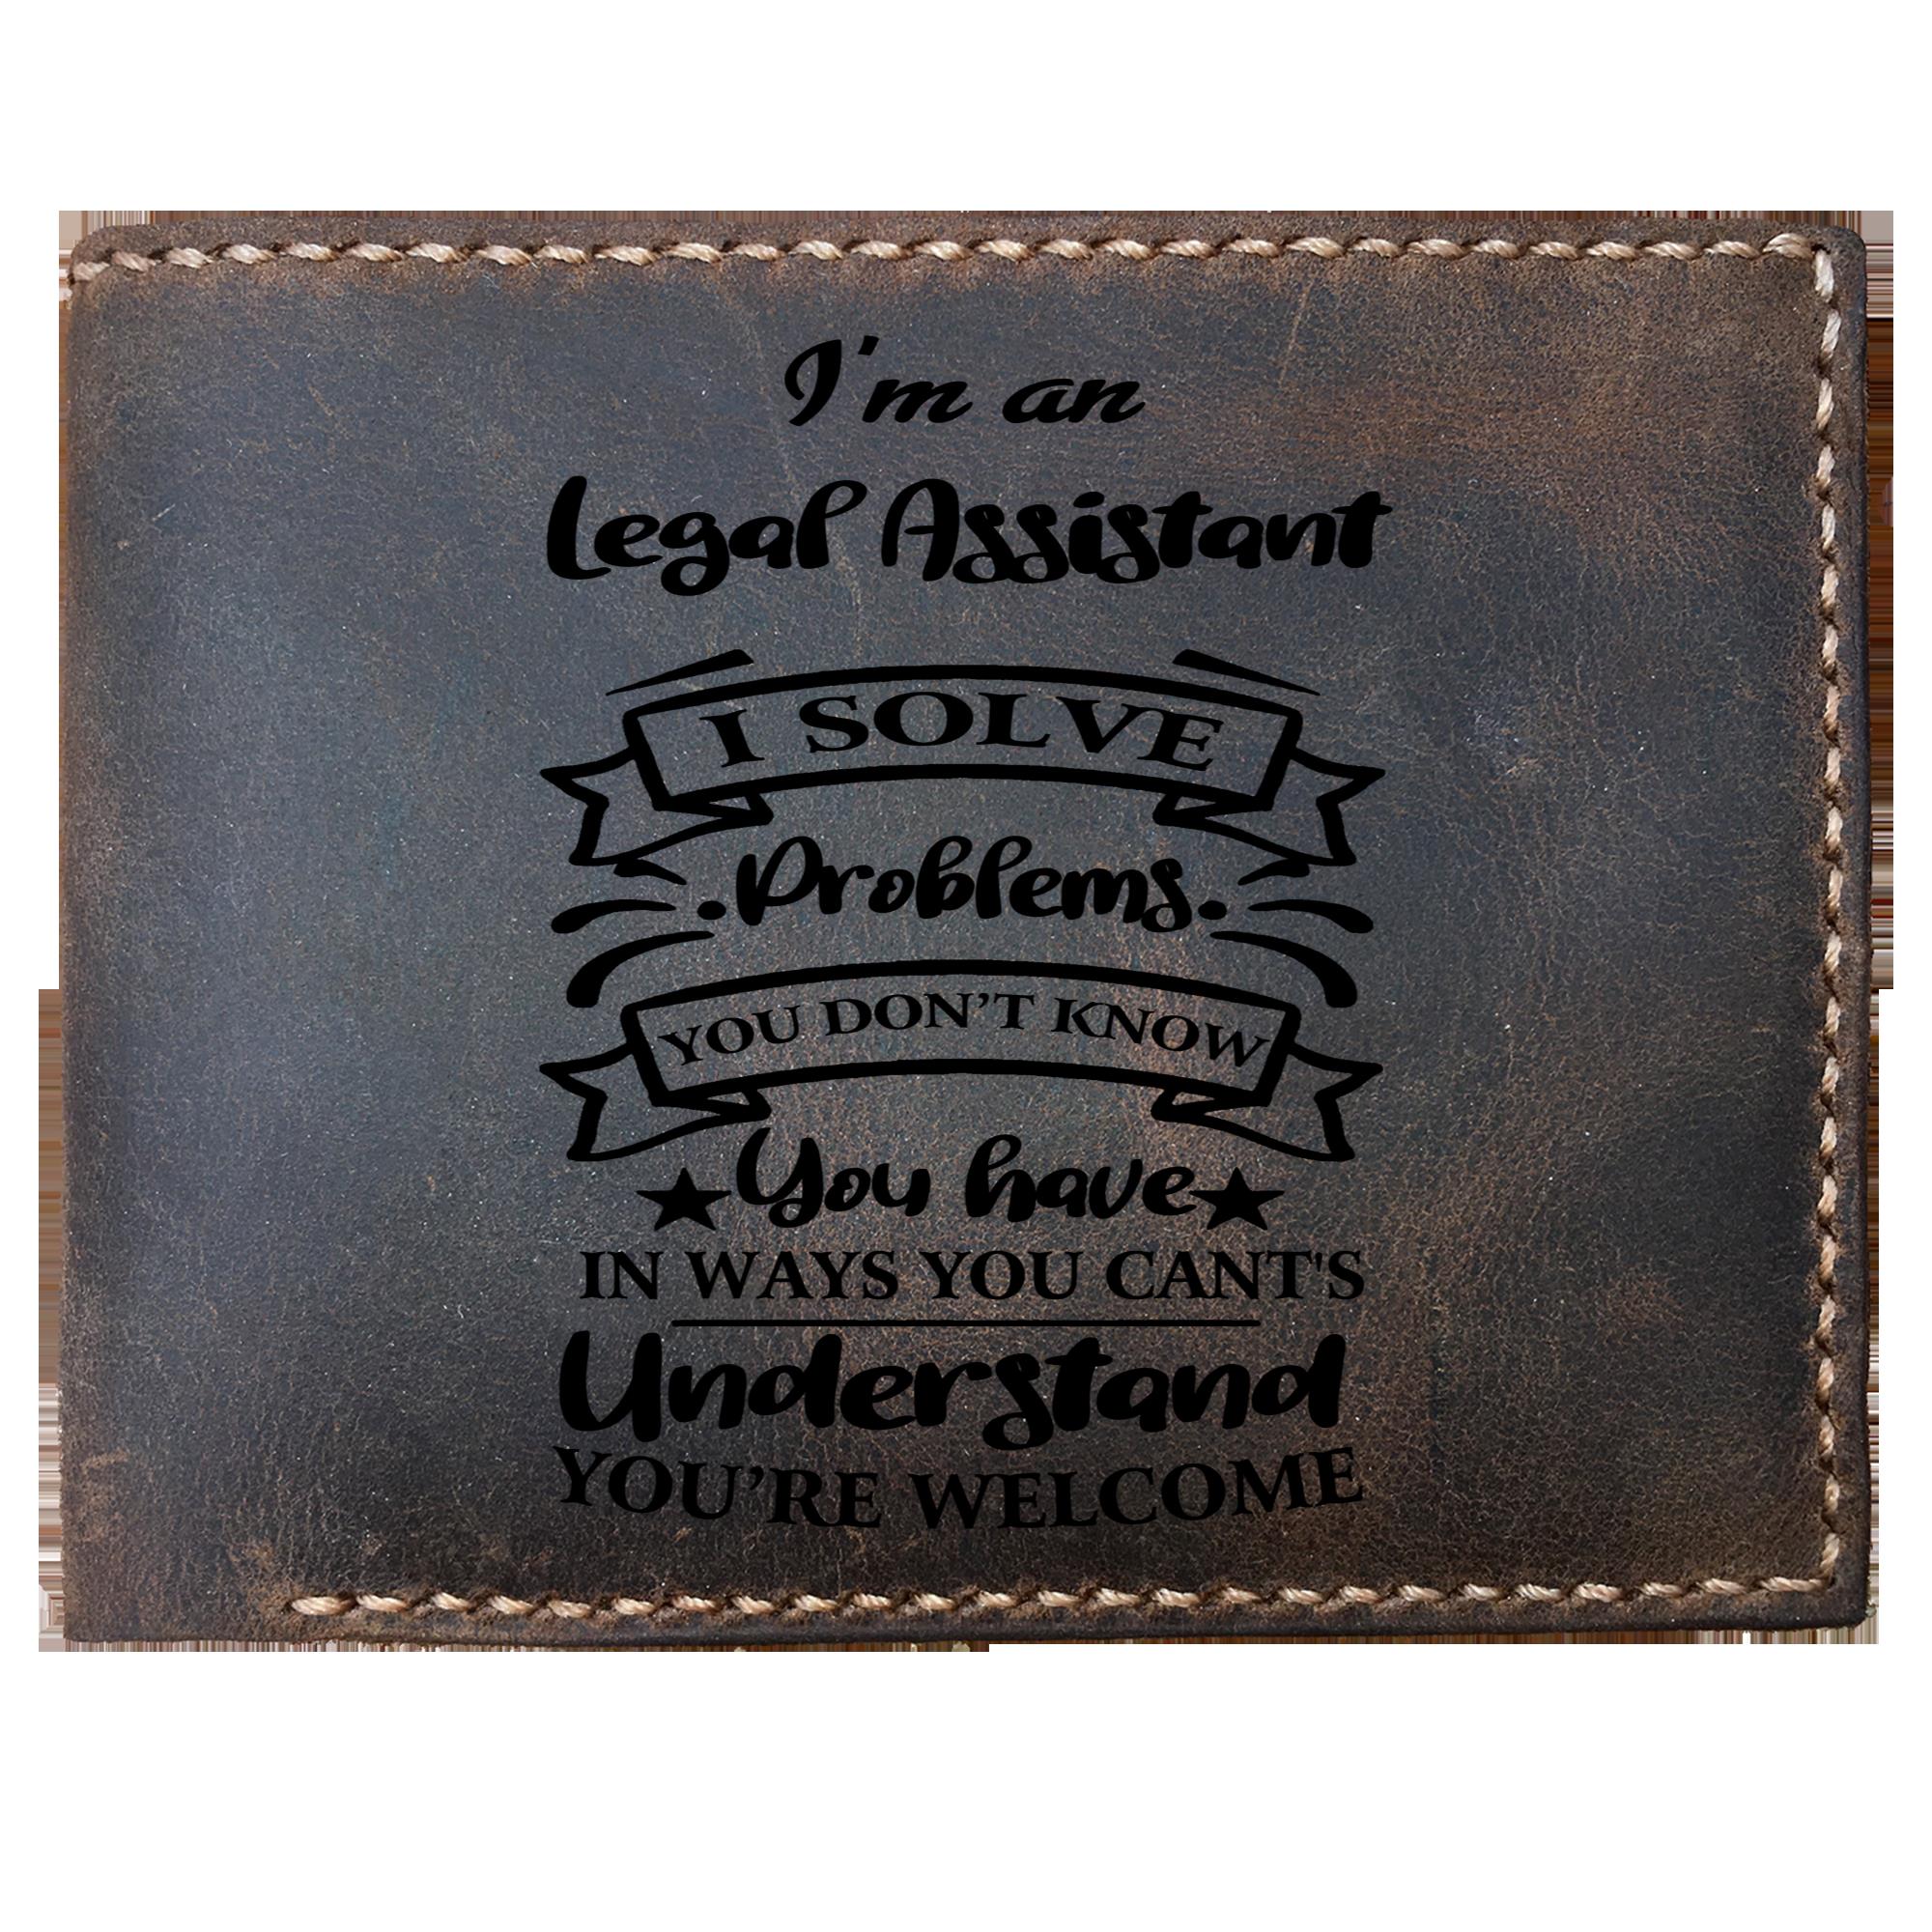 Skitongifts Funny Custom Laser Engraved Bifold Leather Wallet For Men, I'm an Legal Assistant Solve Problems, Father's Day Gifts